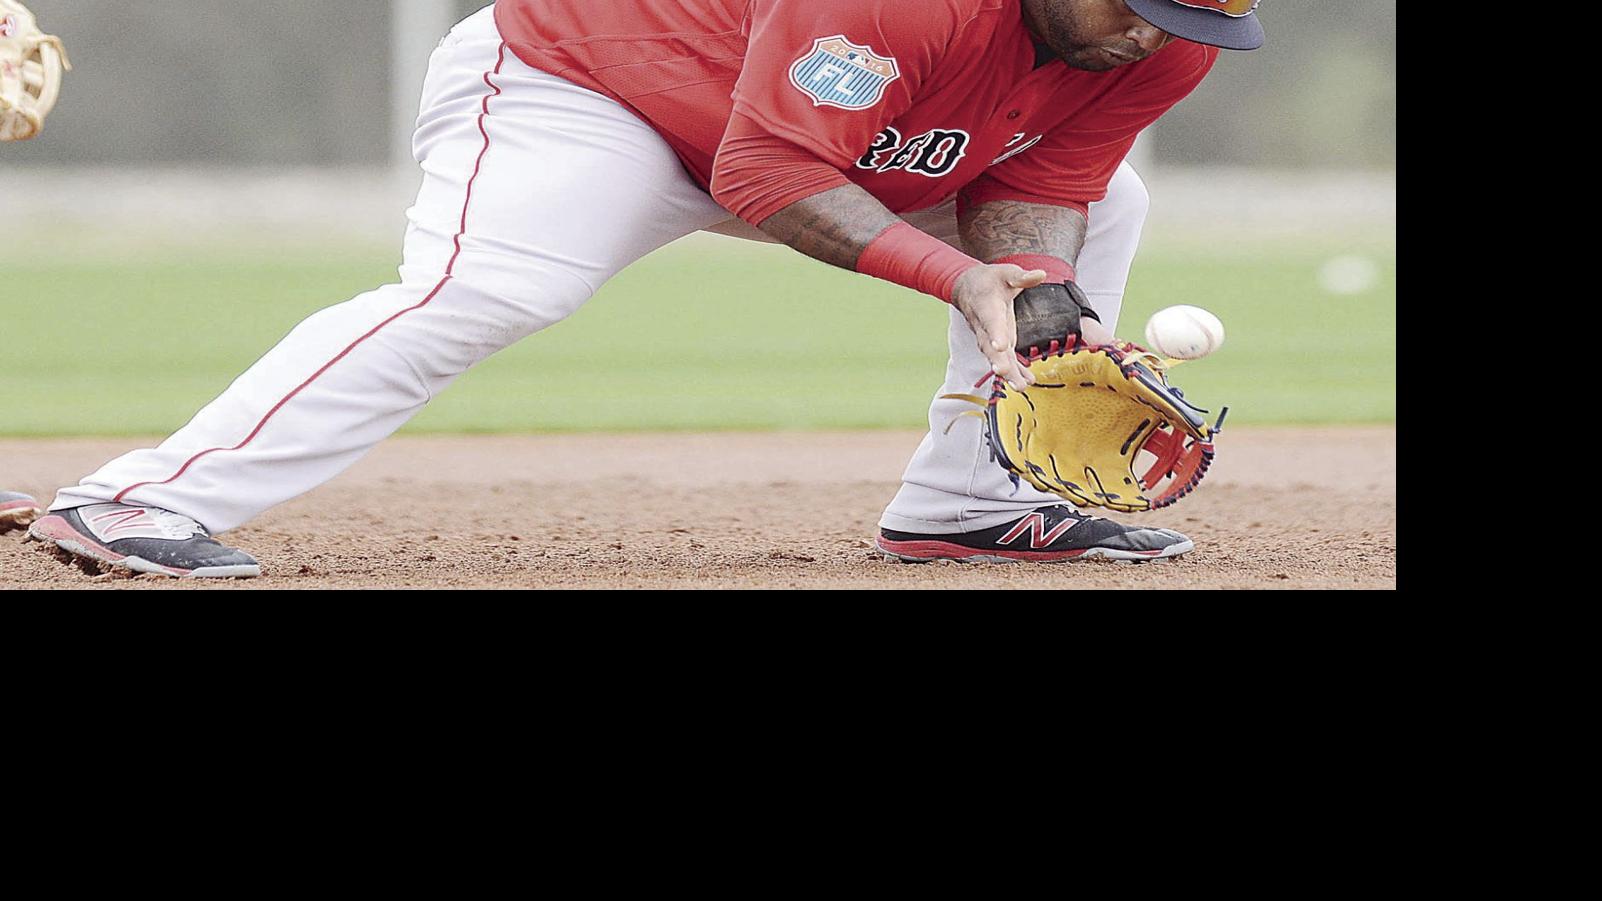 Panda by the pound: 245 things to know about* Pablo Sandoval